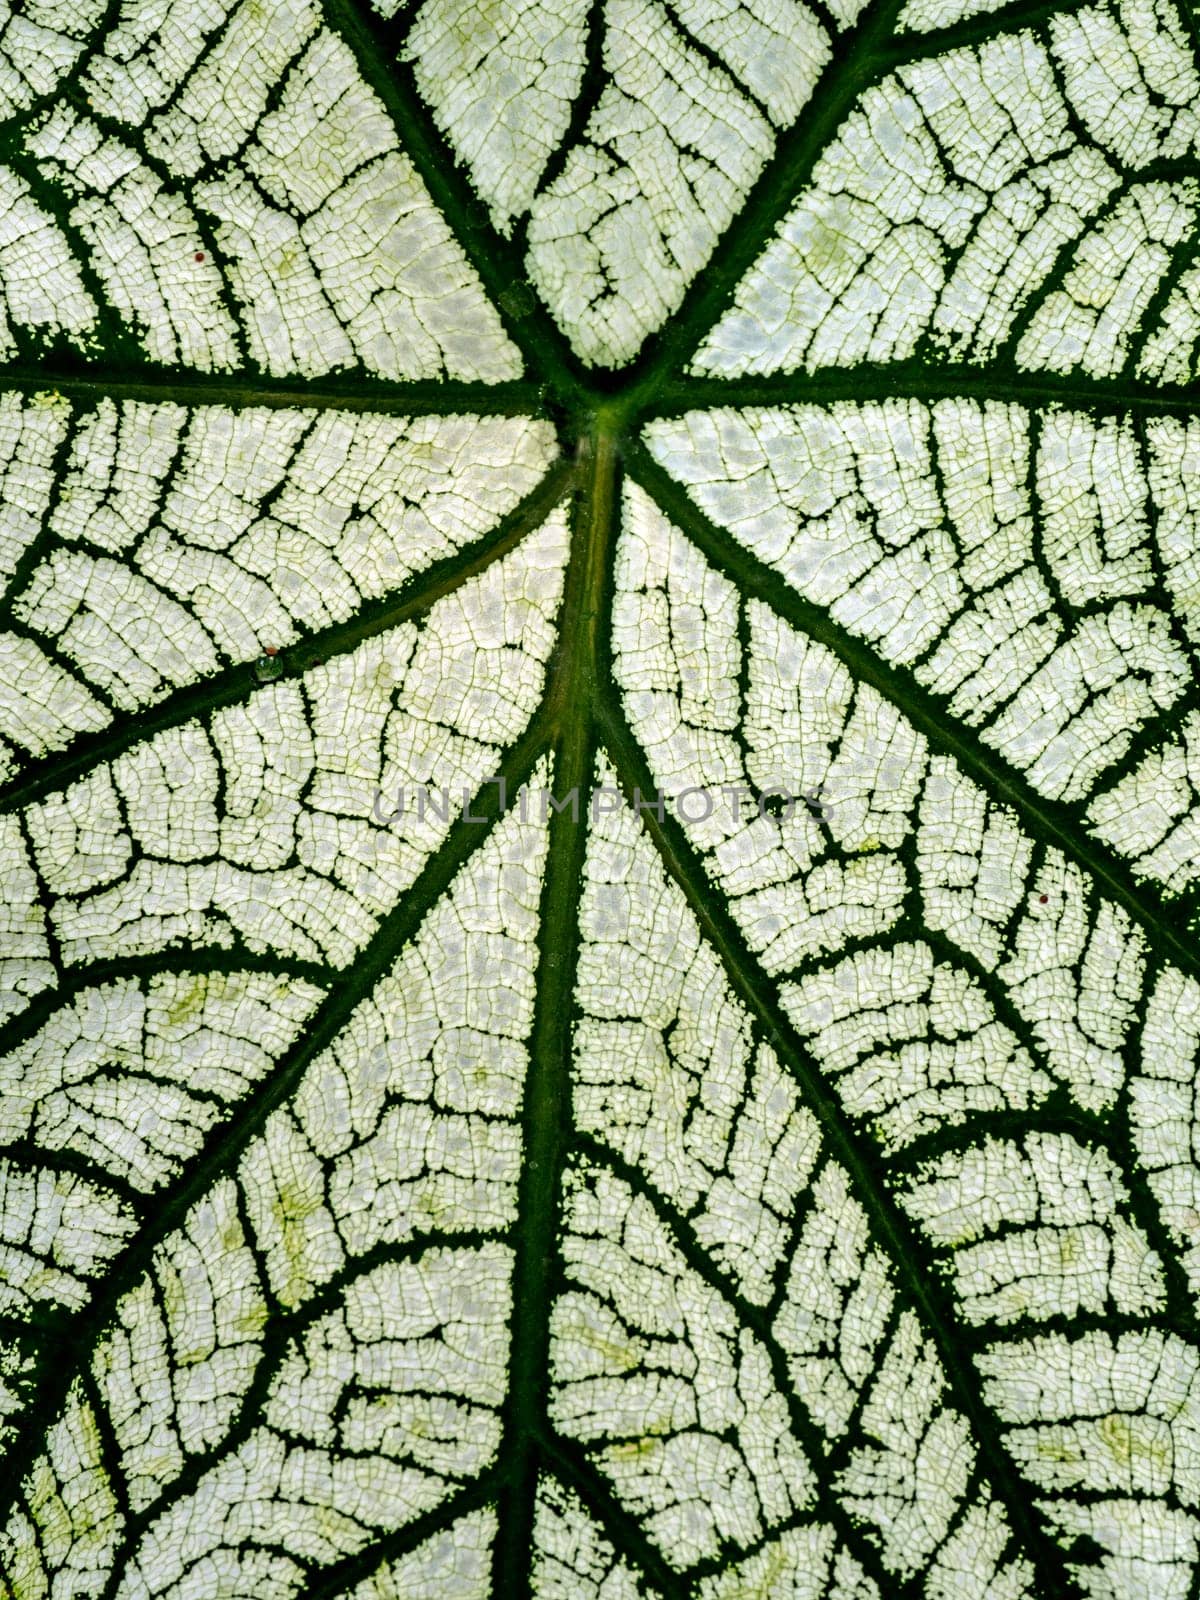 The green pattern on the white surface on the leaf of Caladium bicolor